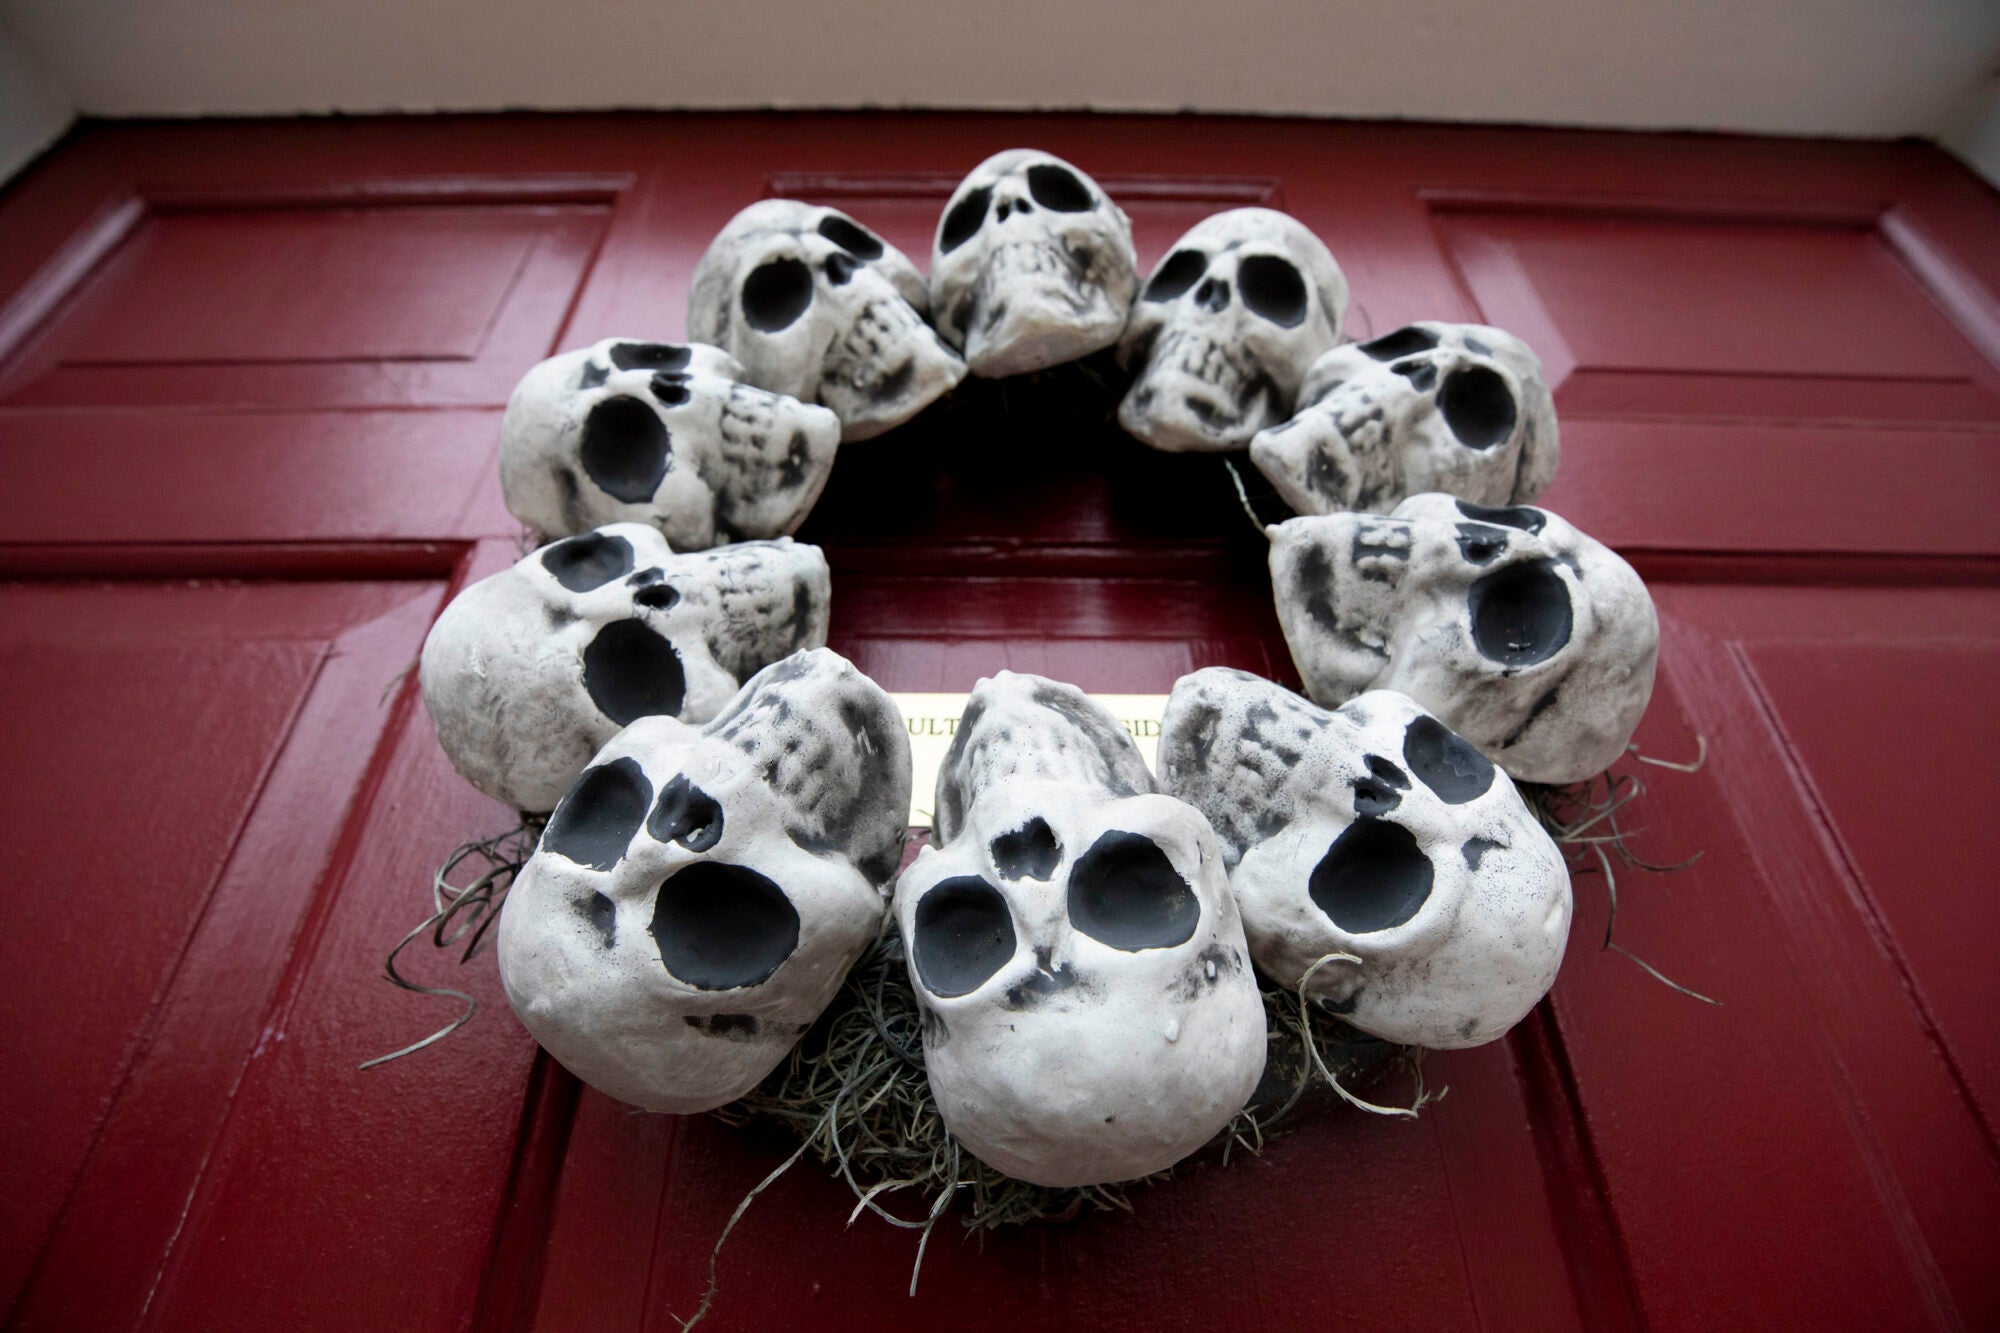 Skulls in a circle like a wreath hang on a red door